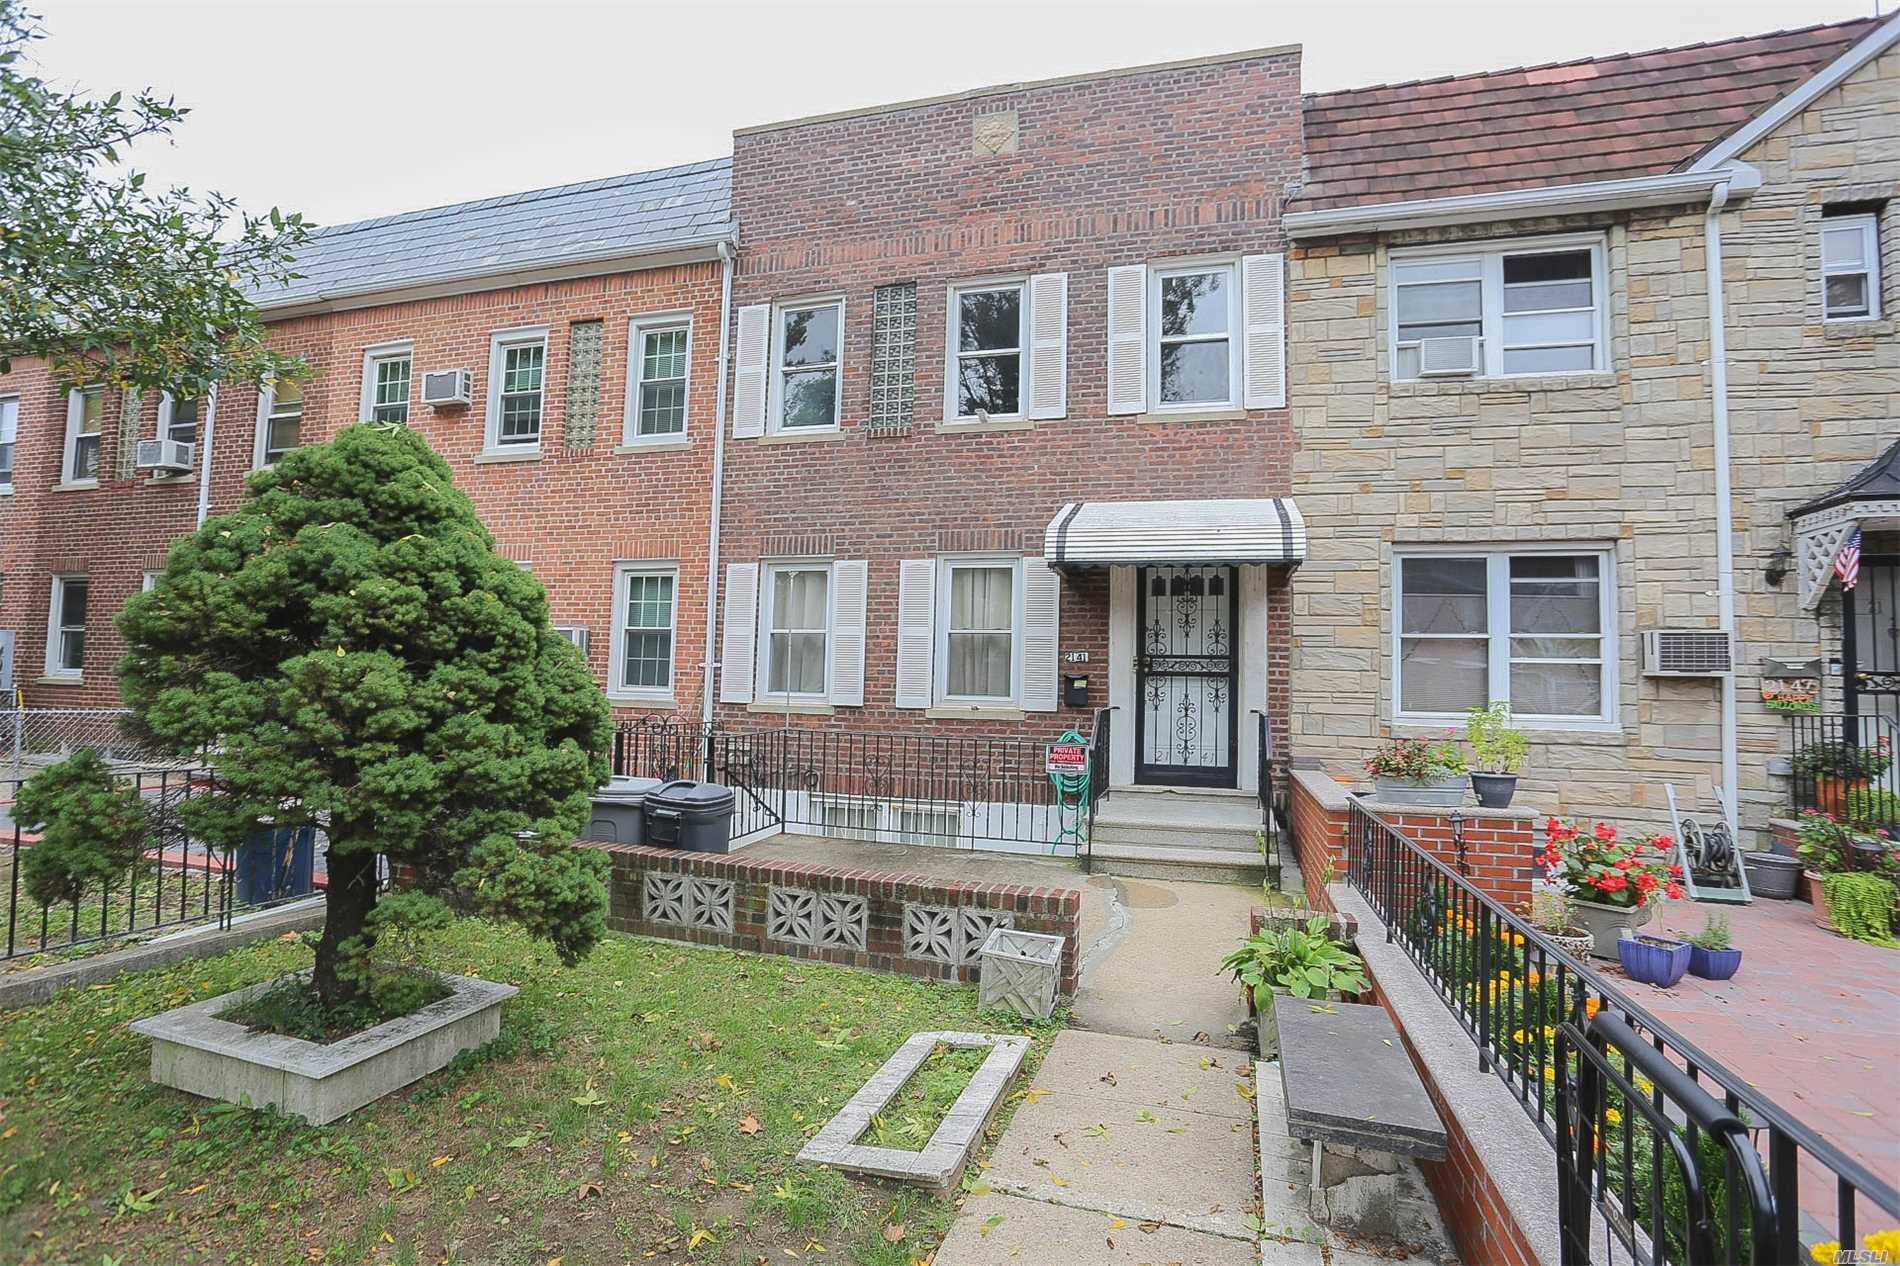 Legal 2 Family Brick Townhouse For Sale In The Upper Ditmars Section Of Astoria.